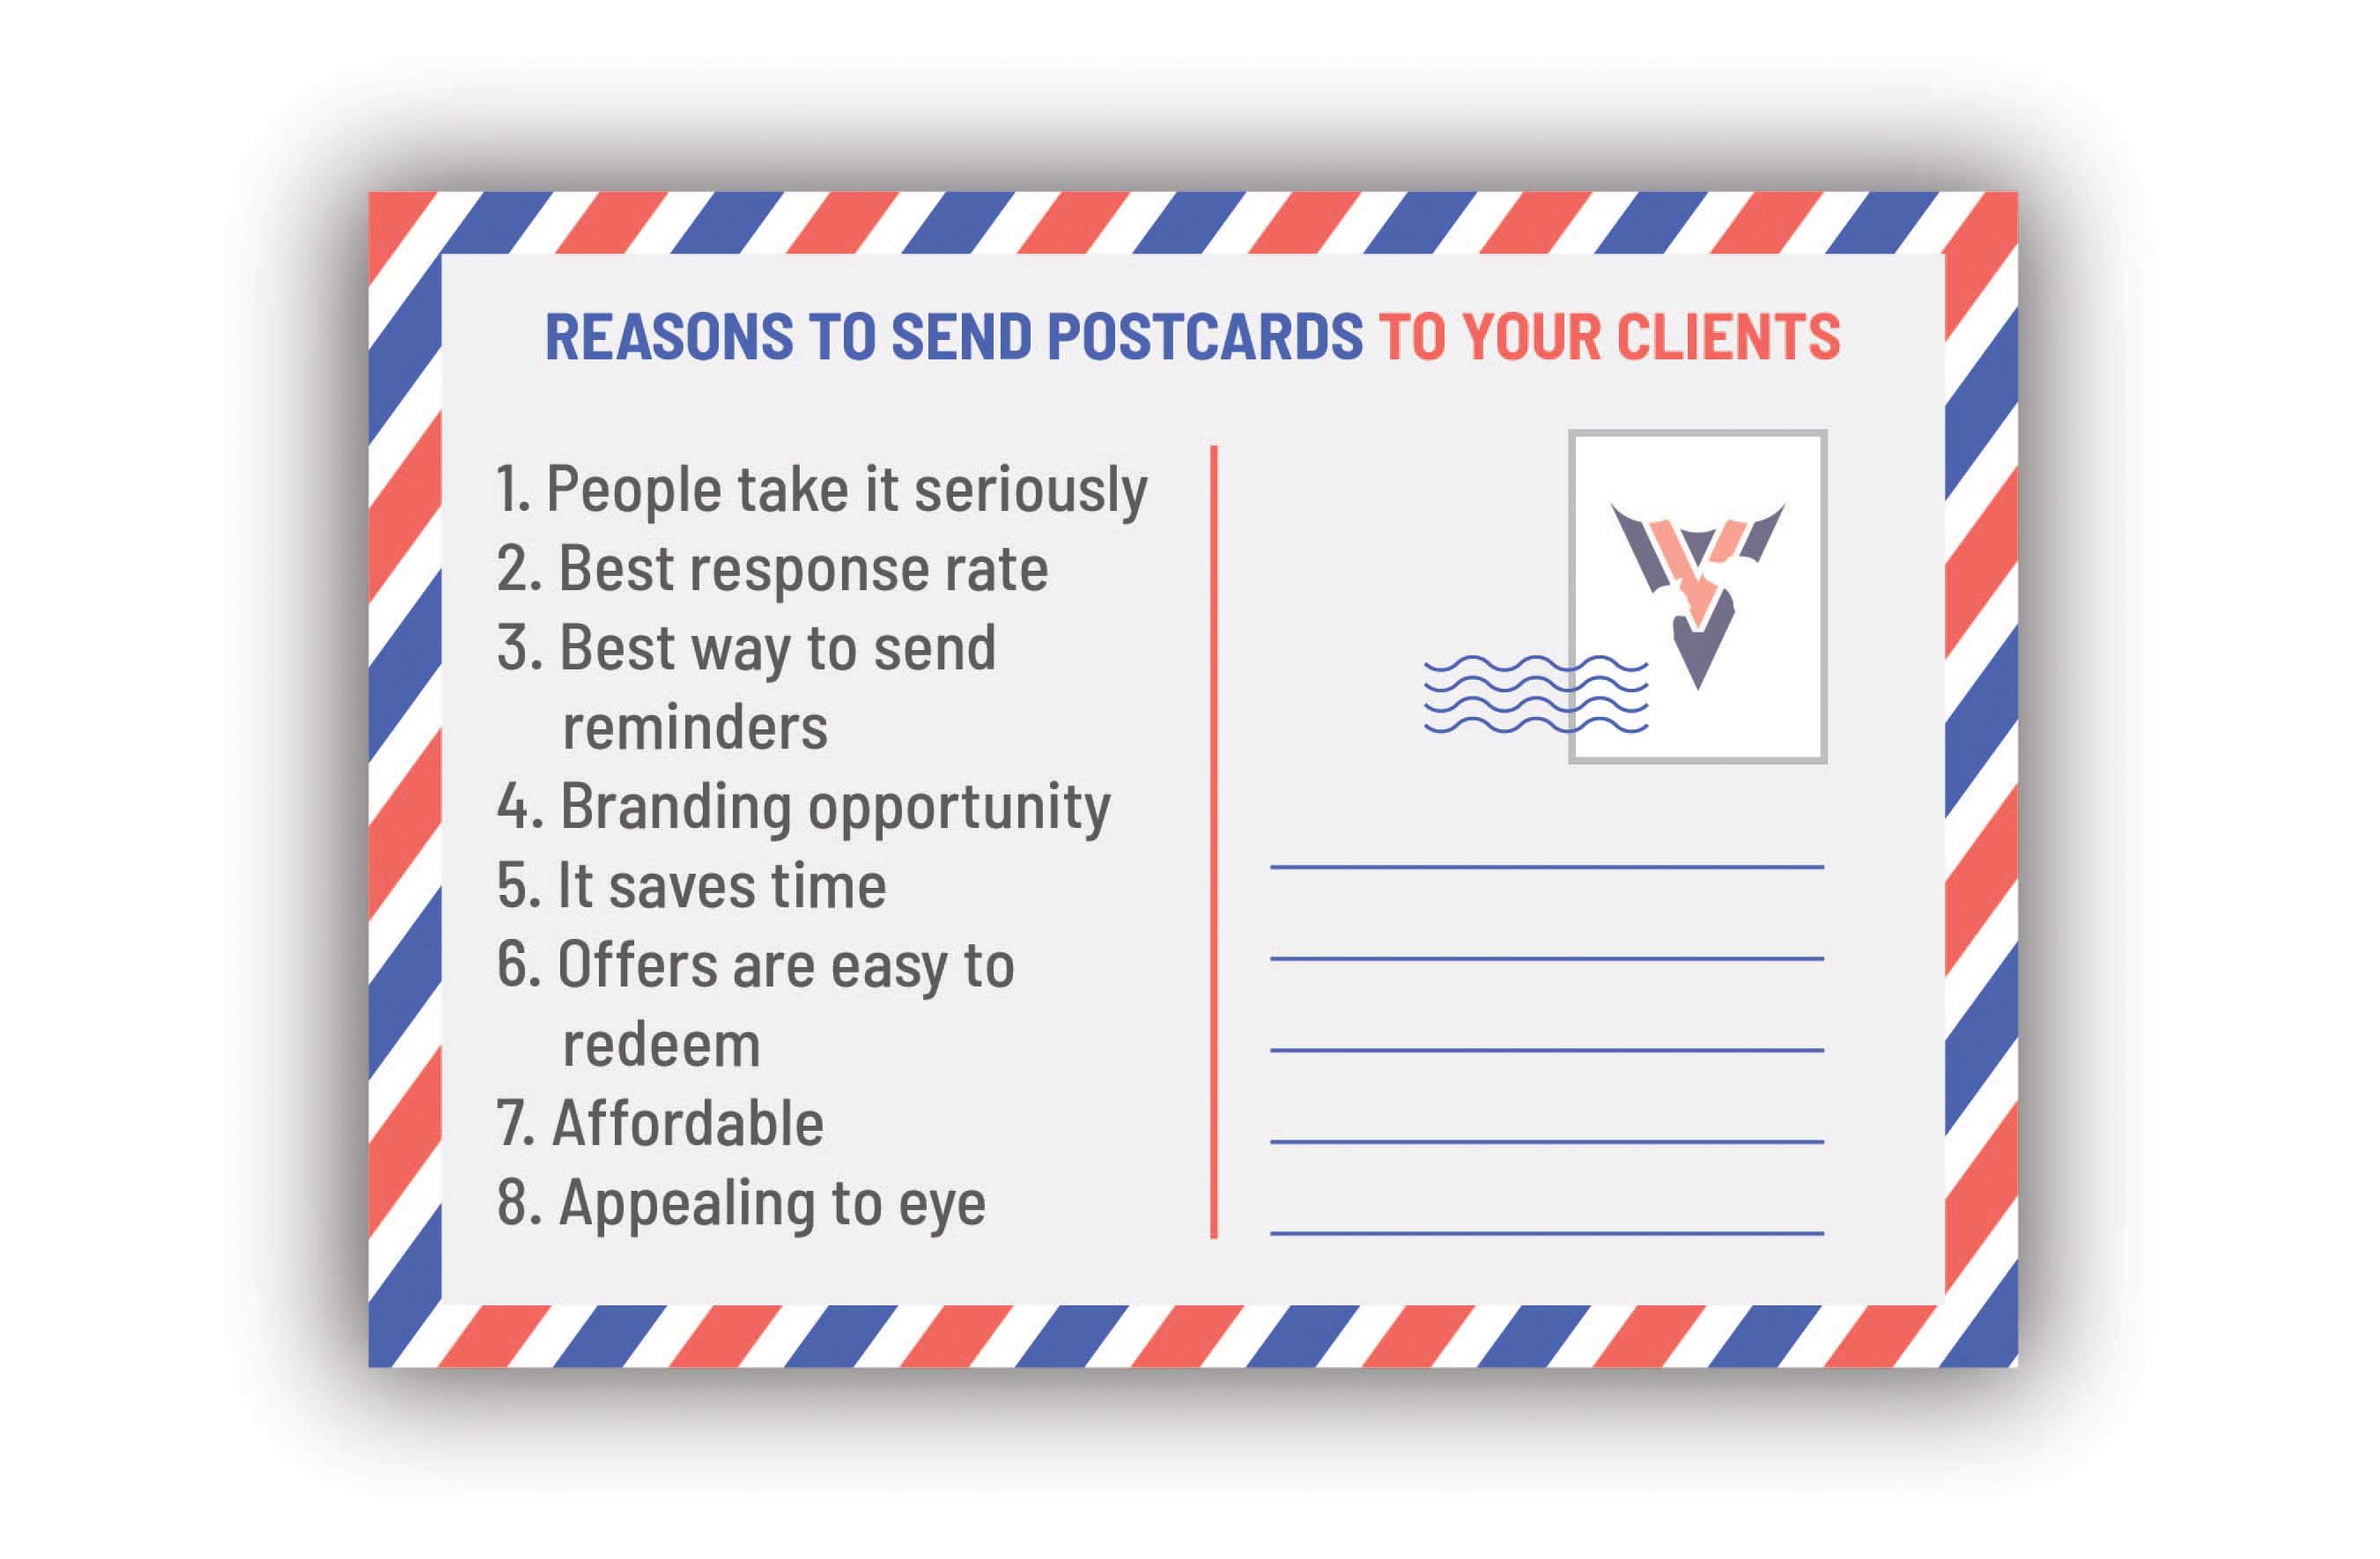 8 reasons to send postcards to the clients of your veterinary clinic